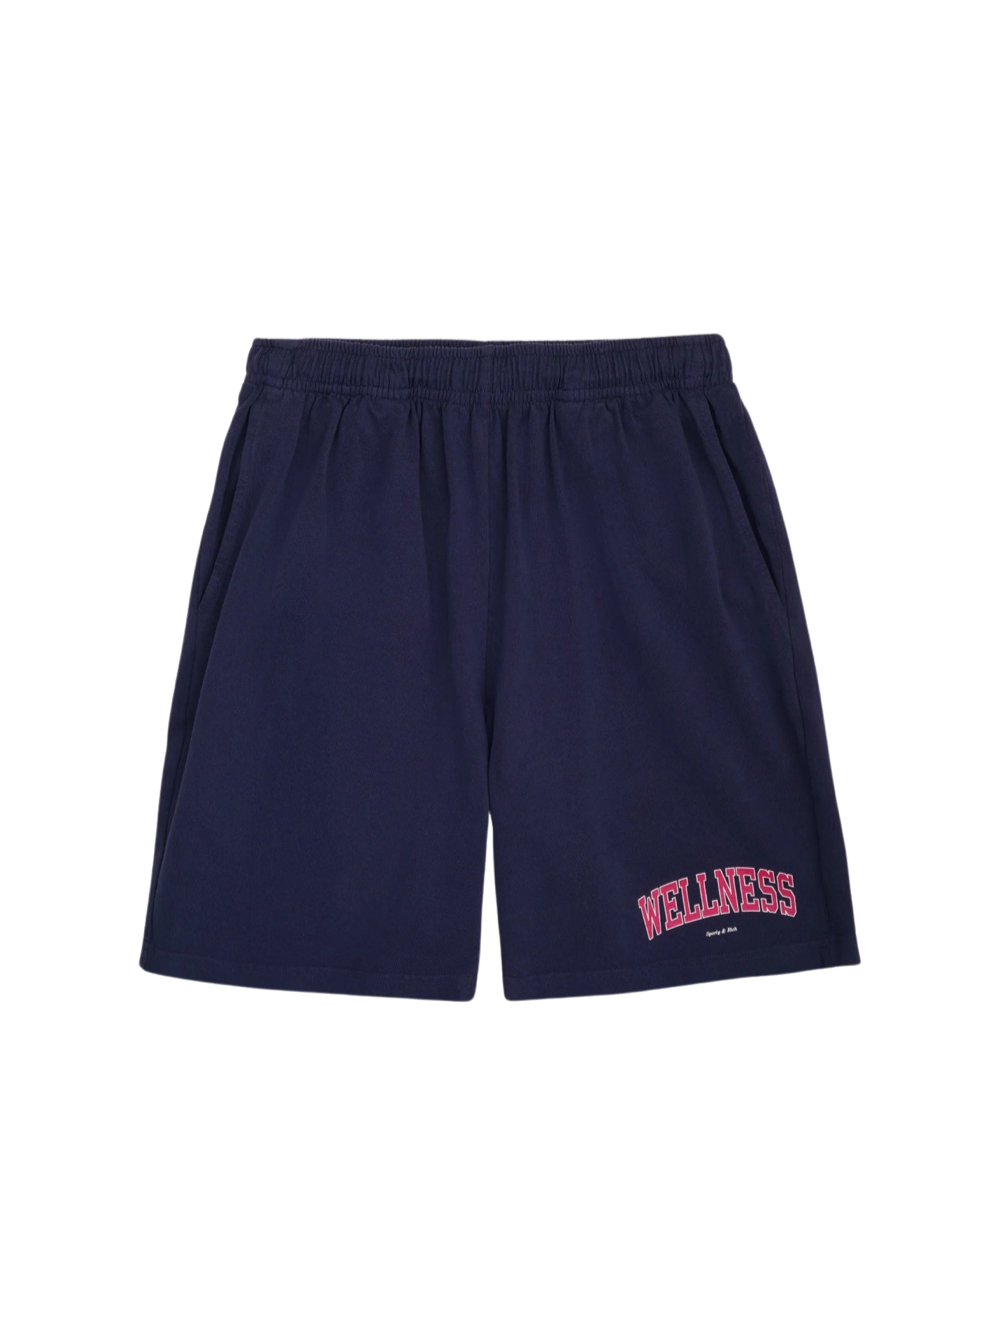 Sporty & Rich Wellness Ivy Gym Short in Navy/Sports Red